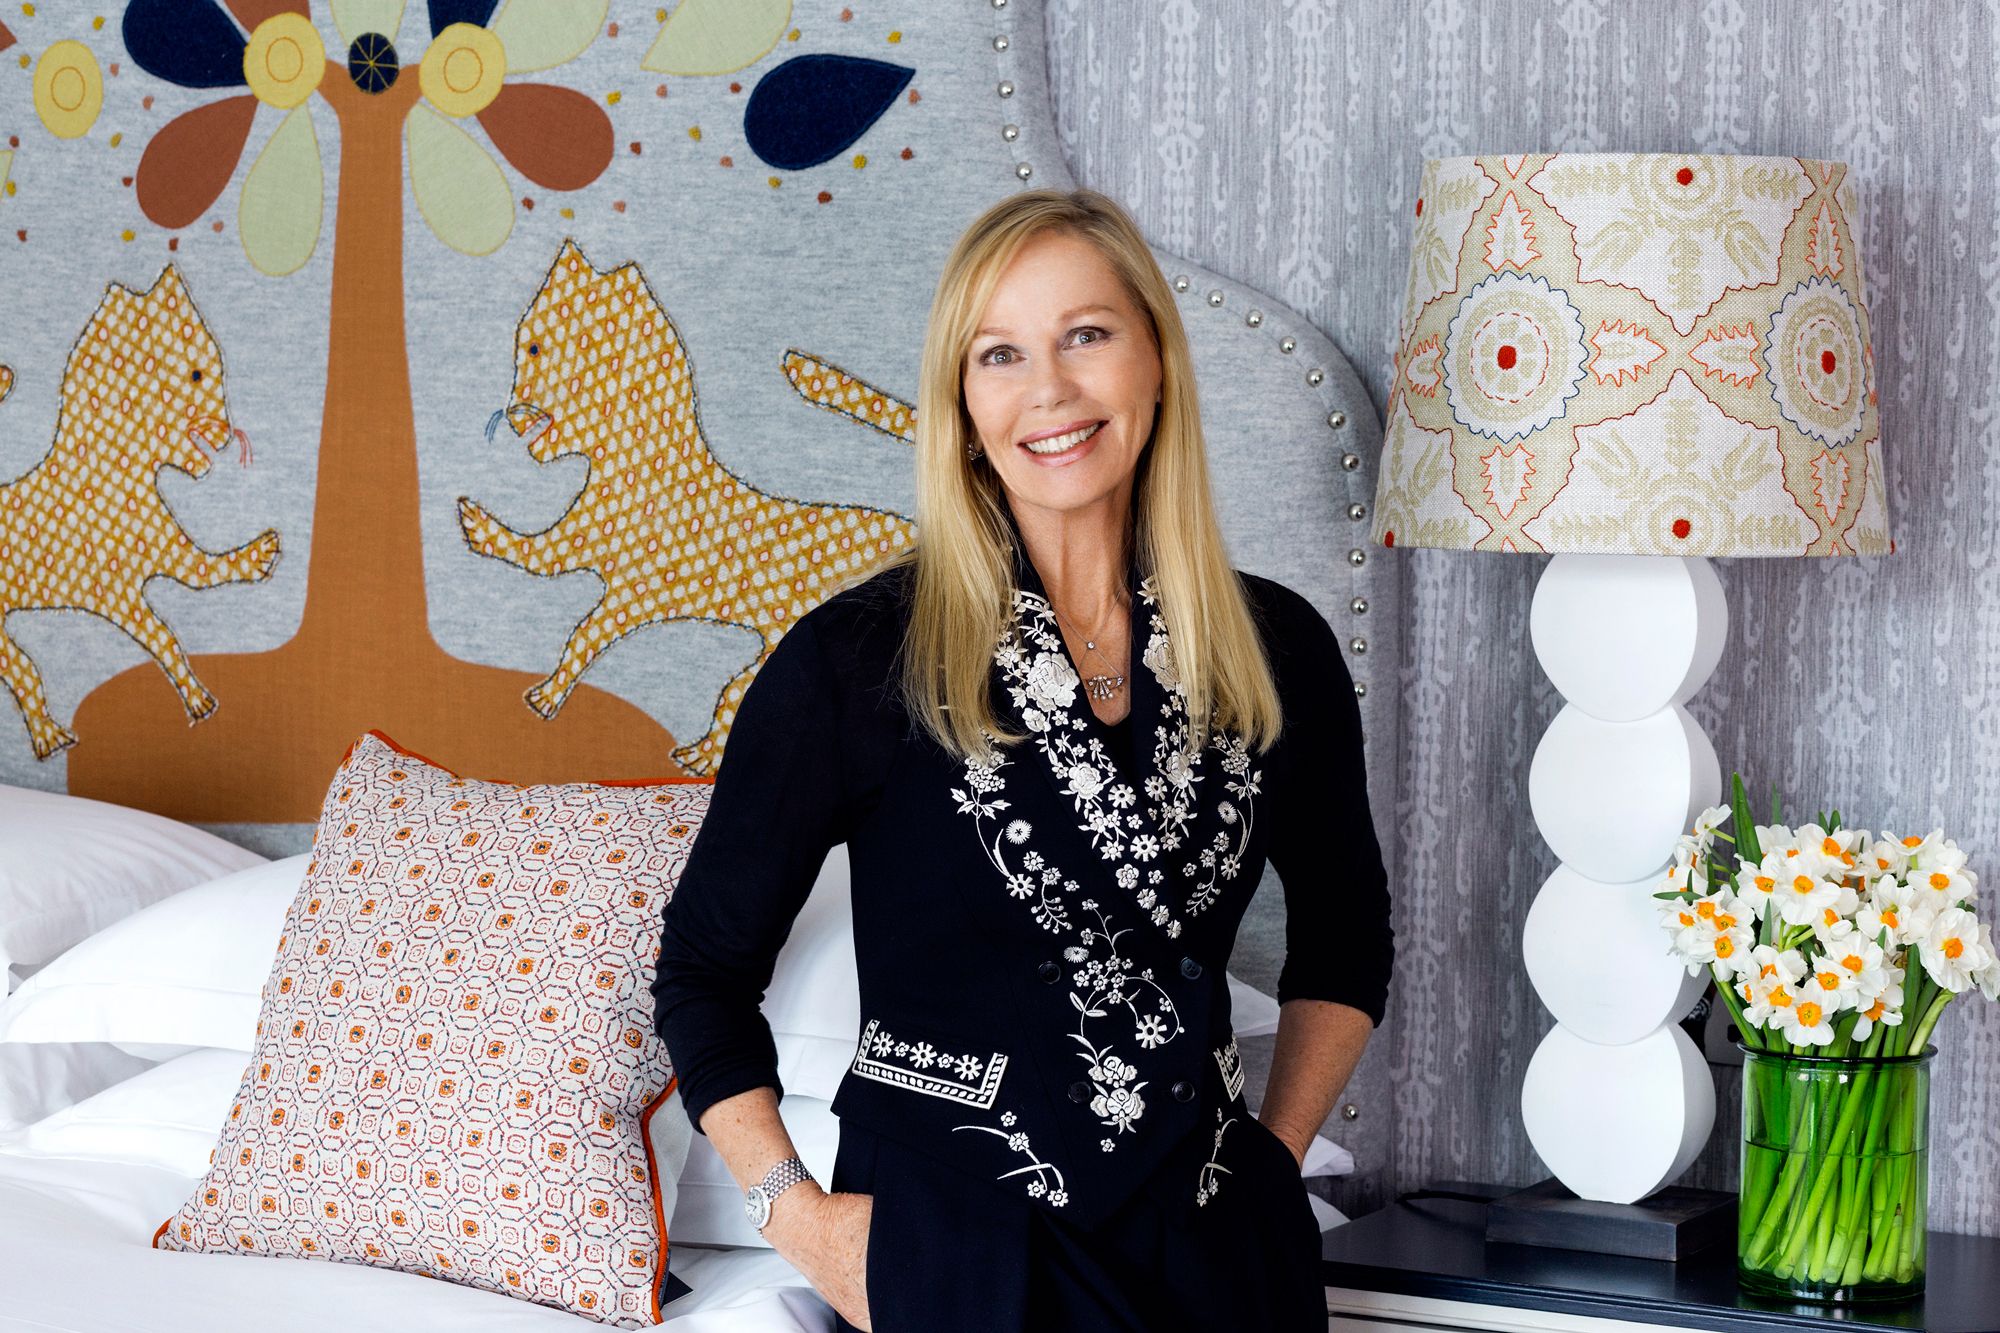 Interior designer Kit Kemp sets a 'dopamine decor' headboard trend by using bright florals in her hotels